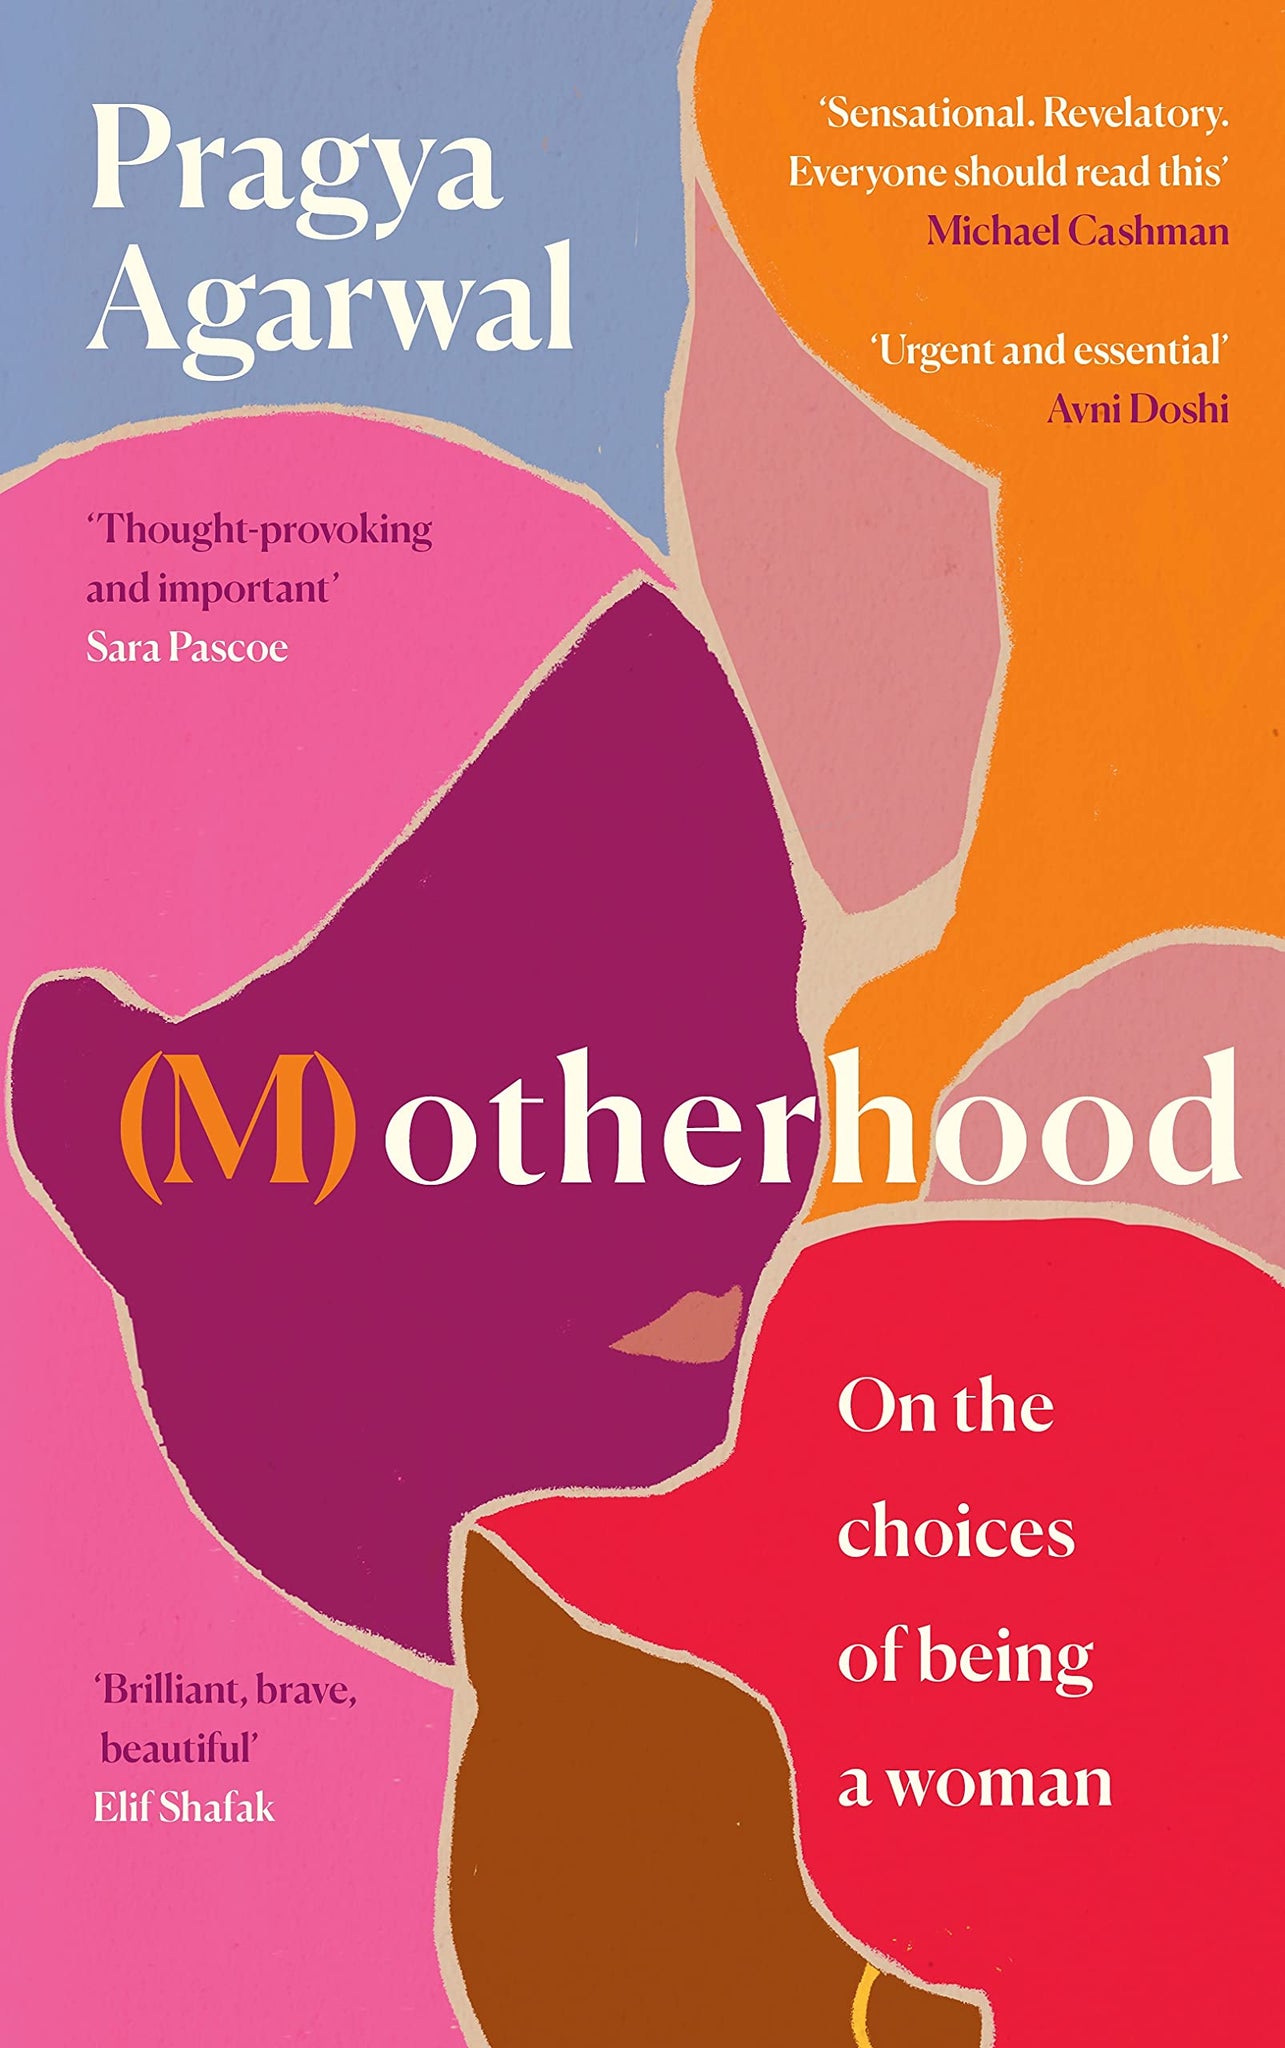 (M)otherhood : On the choices of being a woman - Hardback